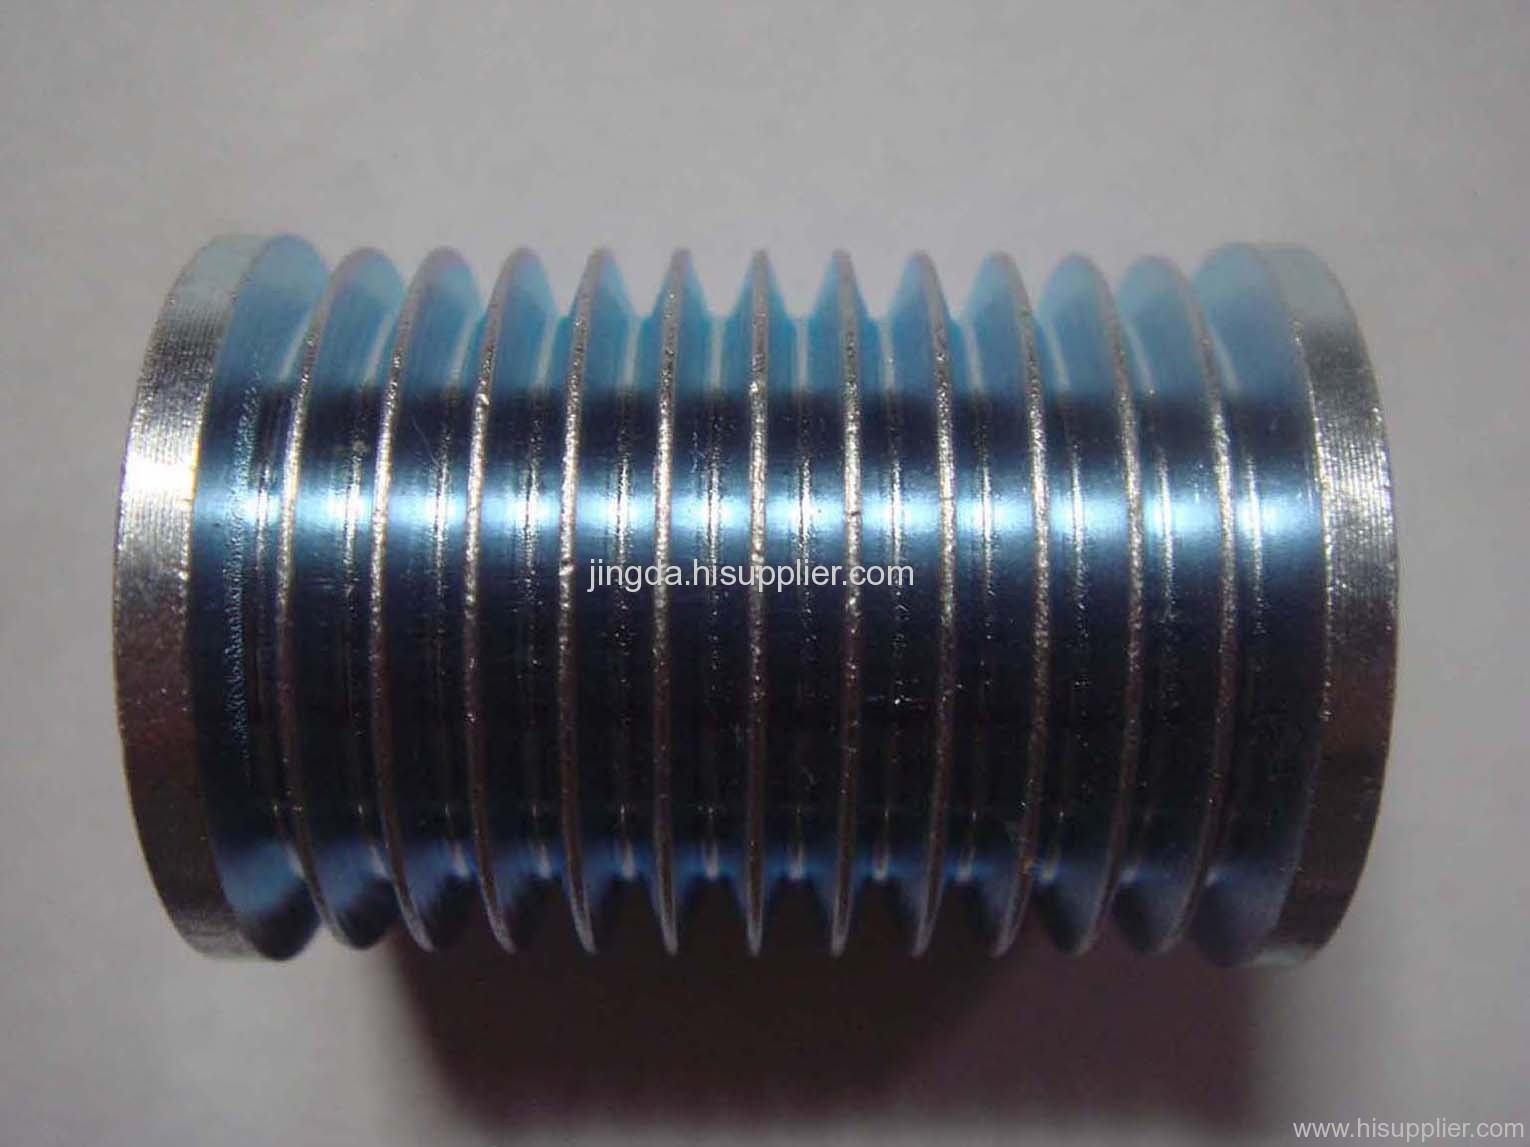 easy cutting steel made V-belt pulley for electrical motor in small home appliance produced by CNC precision machining